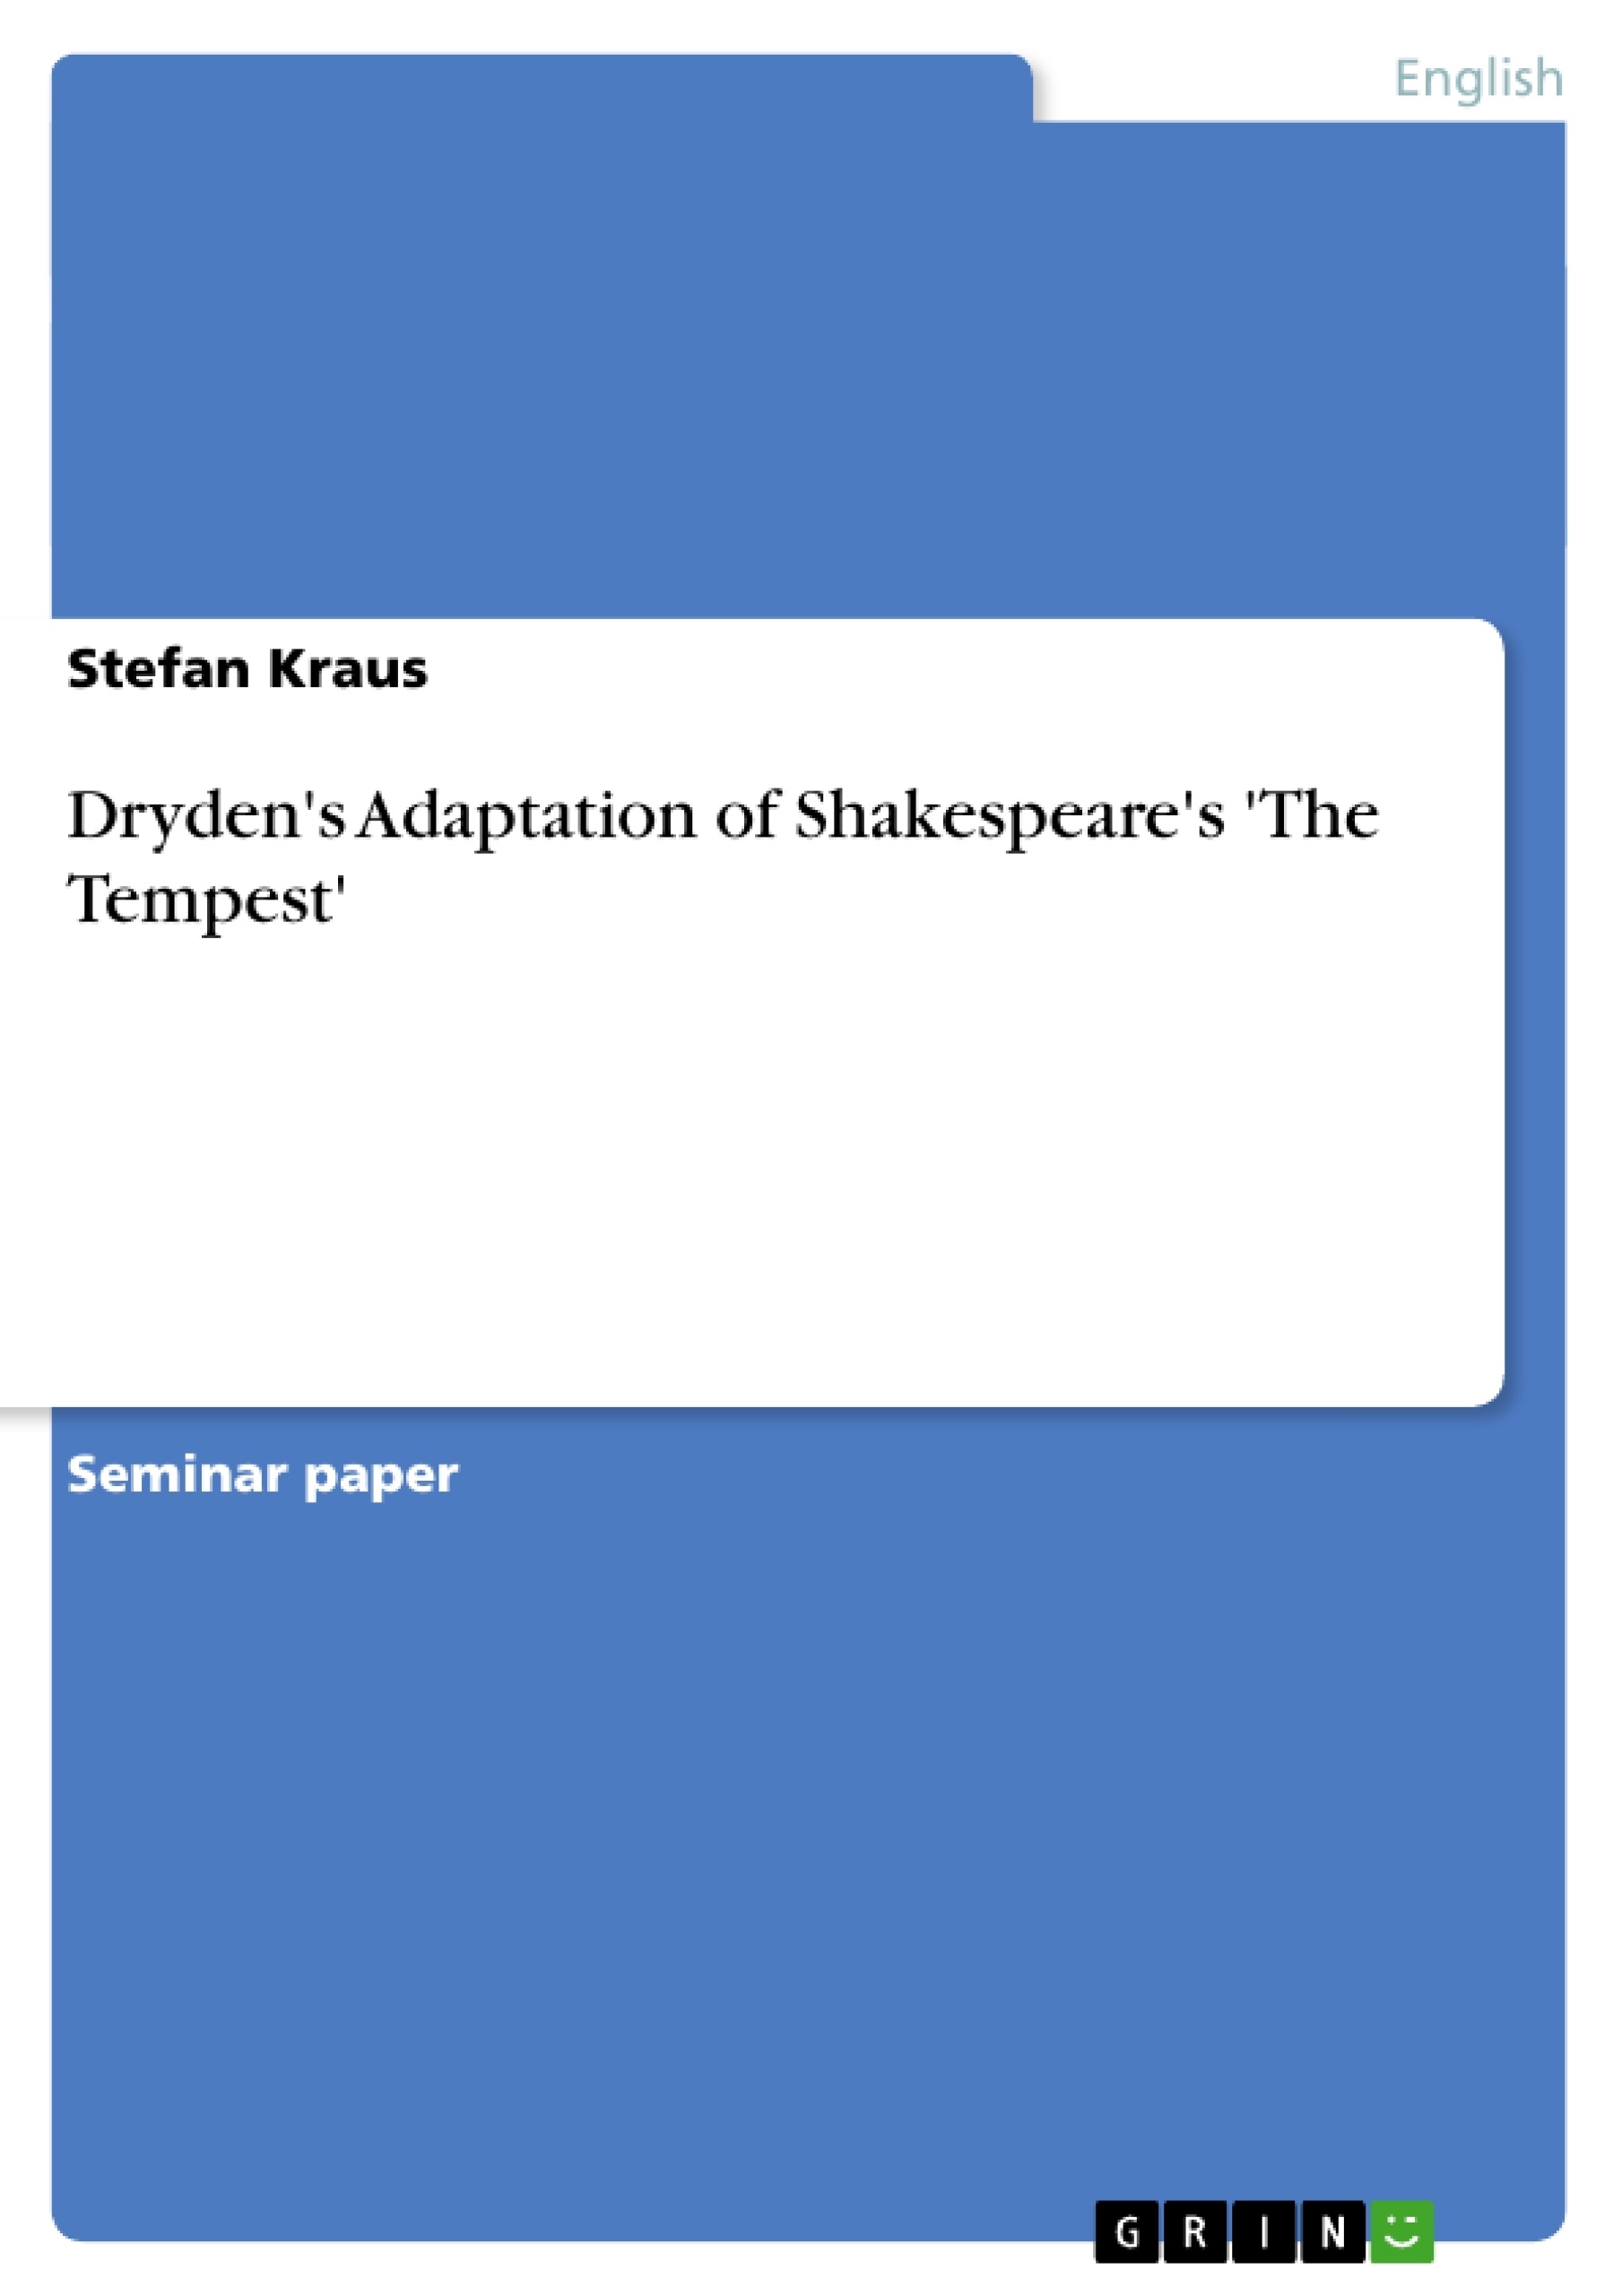 Titre: Dryden's Adaptation of Shakespeare's 'The Tempest'